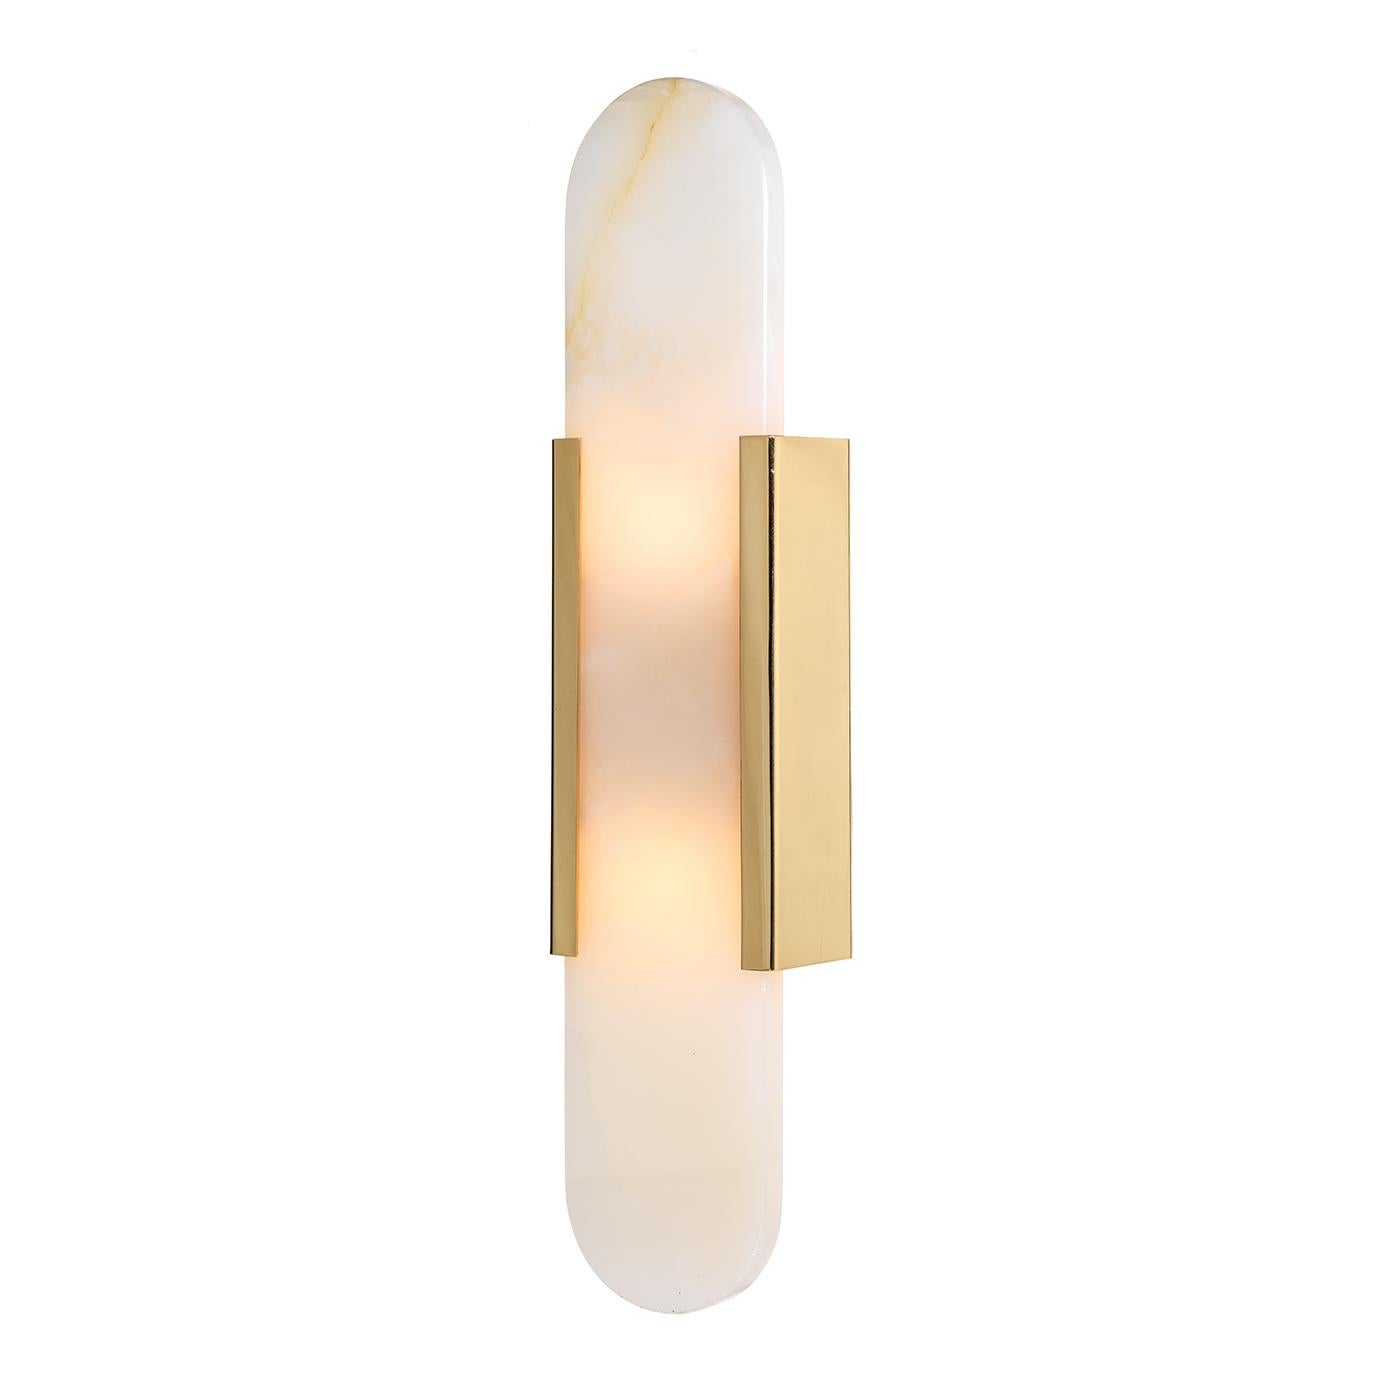 This elegant and minimalist wall lamp is best displayed as a set of two to light up a modern hallway or living space. Its simple and luminous brass frame holds an elongated onyx slab with rounded extremities, resulting enchantingly emphasized in its